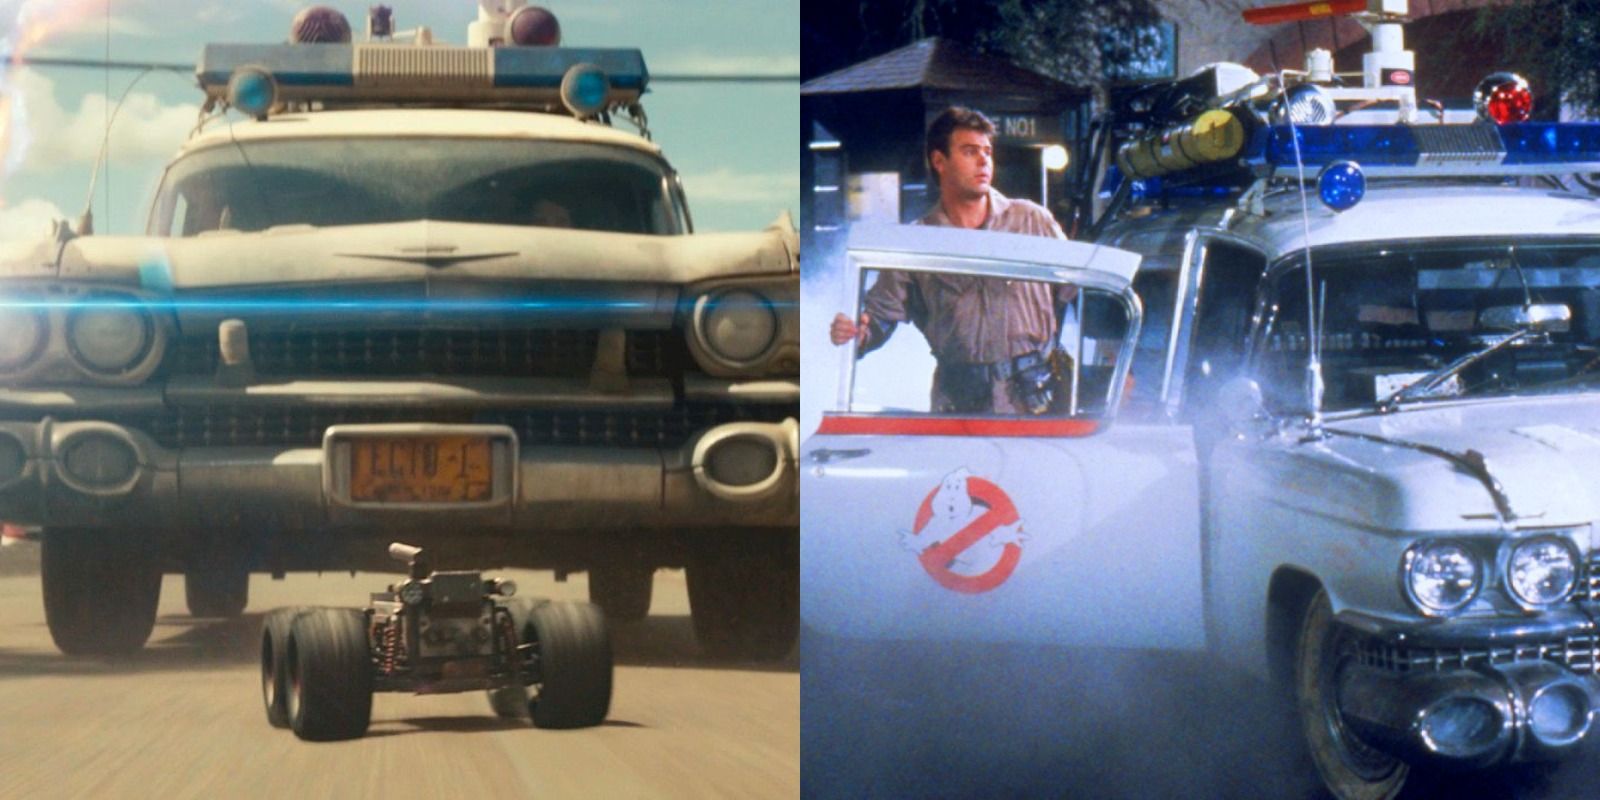 Split-image-of-Ecto-1-driving-through-Summerville-in-Ghostbusters-Afterlife-and-the-Ghostbusters-disembarking-Ecto-1-in-Ghostbusters-1984.jpg